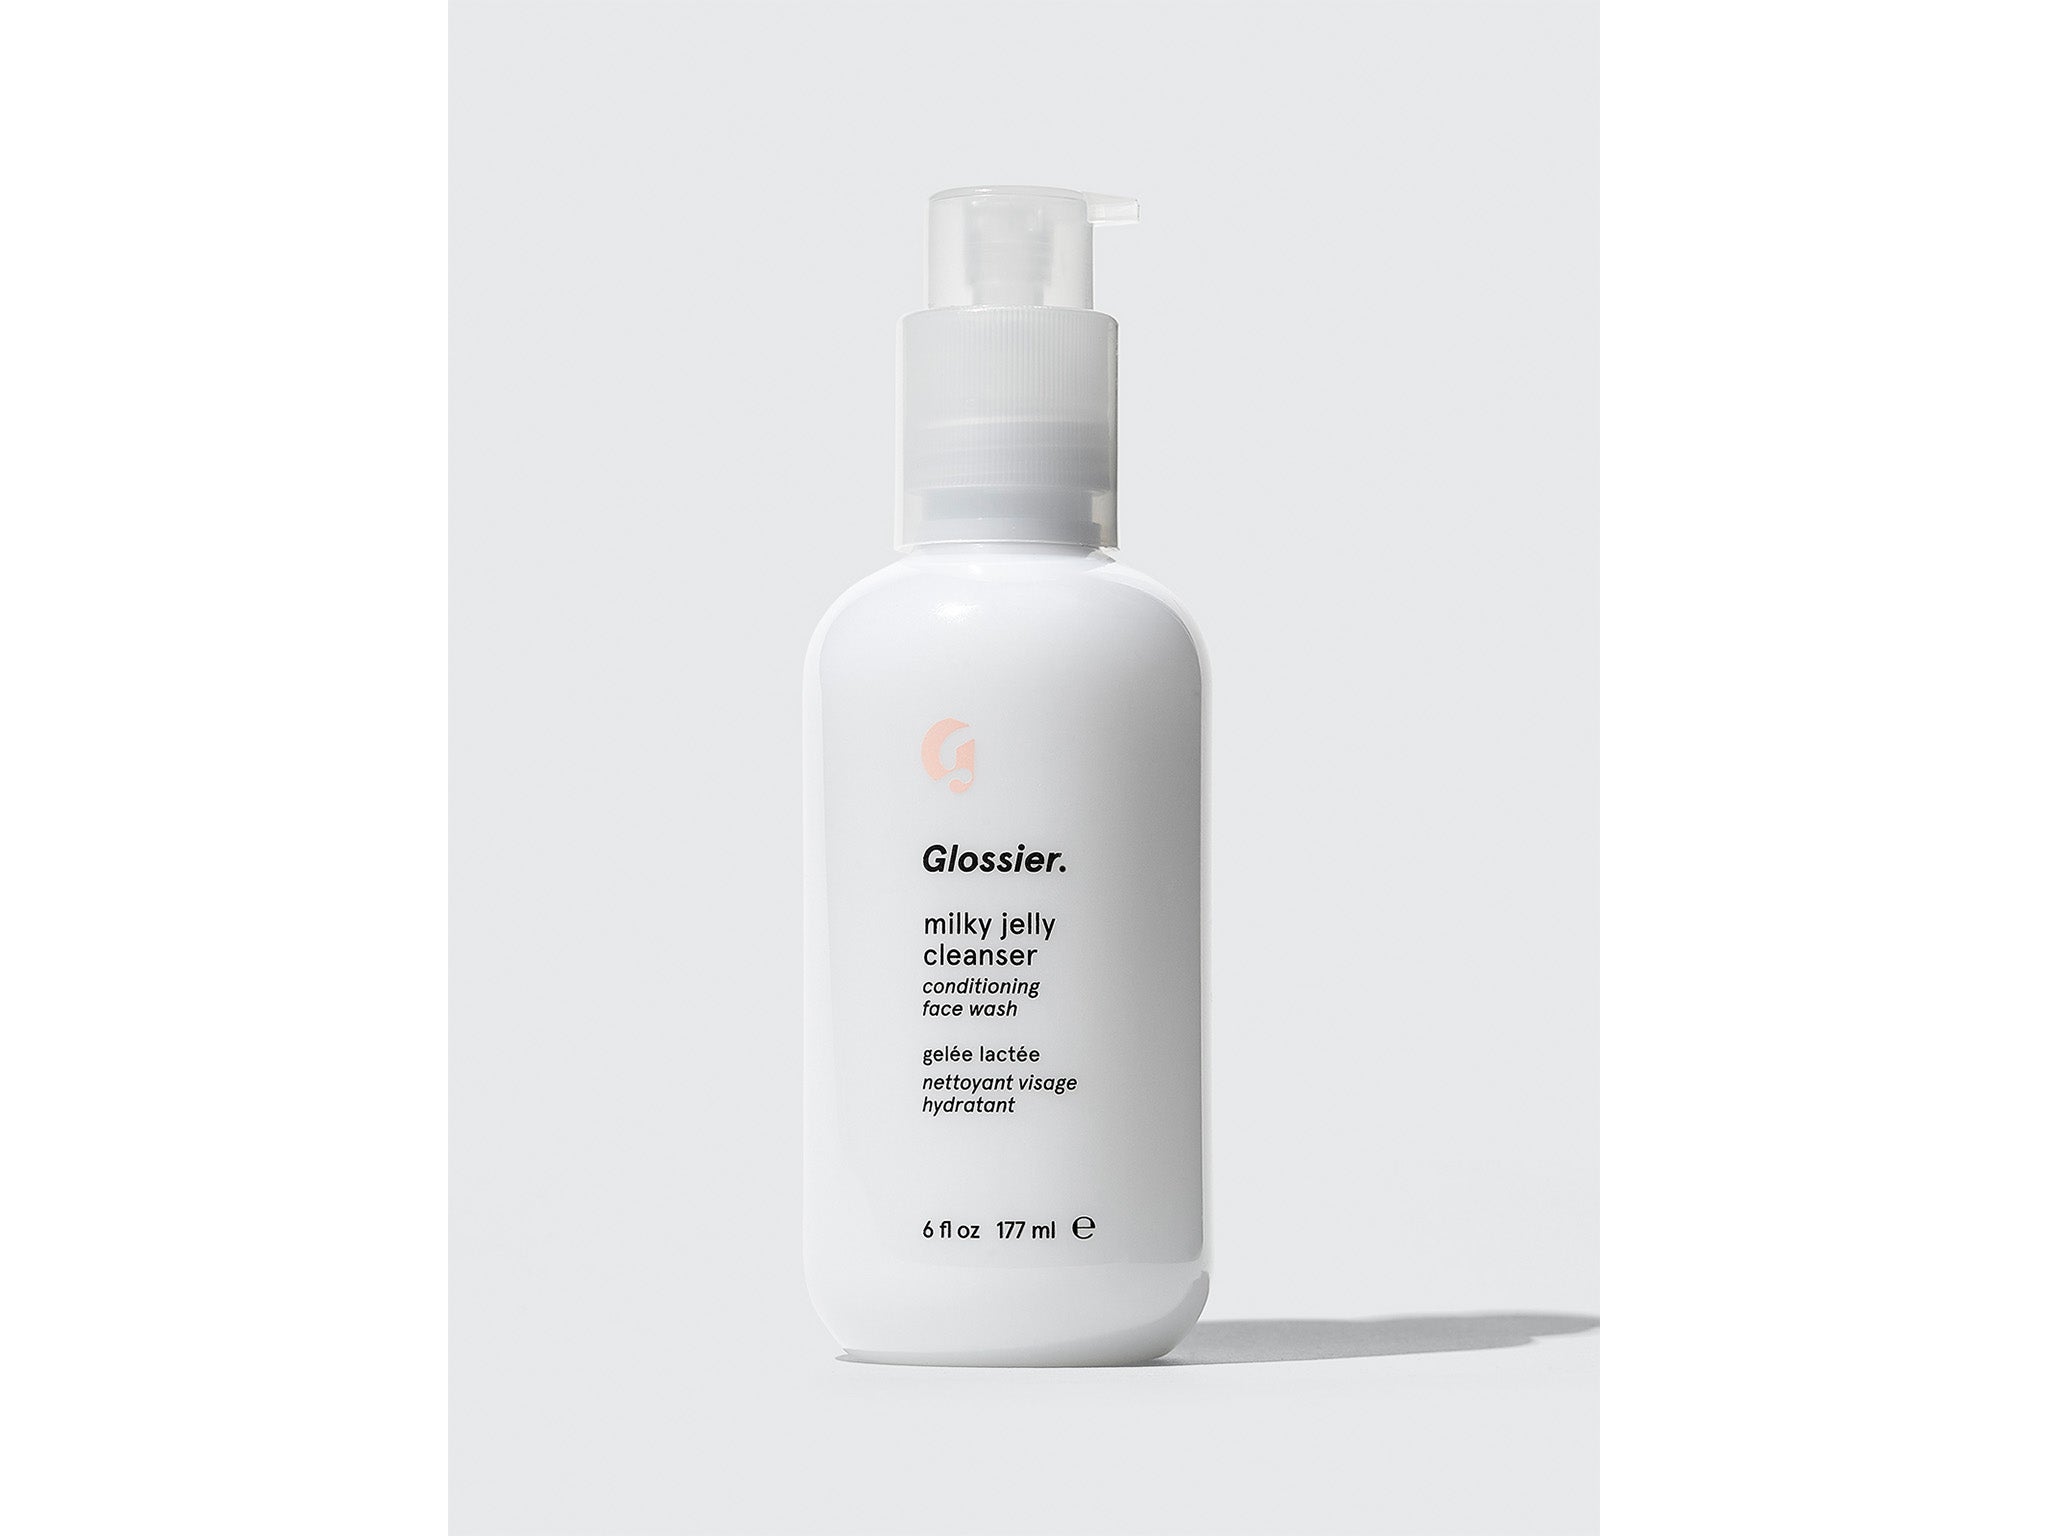 Glossier milky jelly cleanser